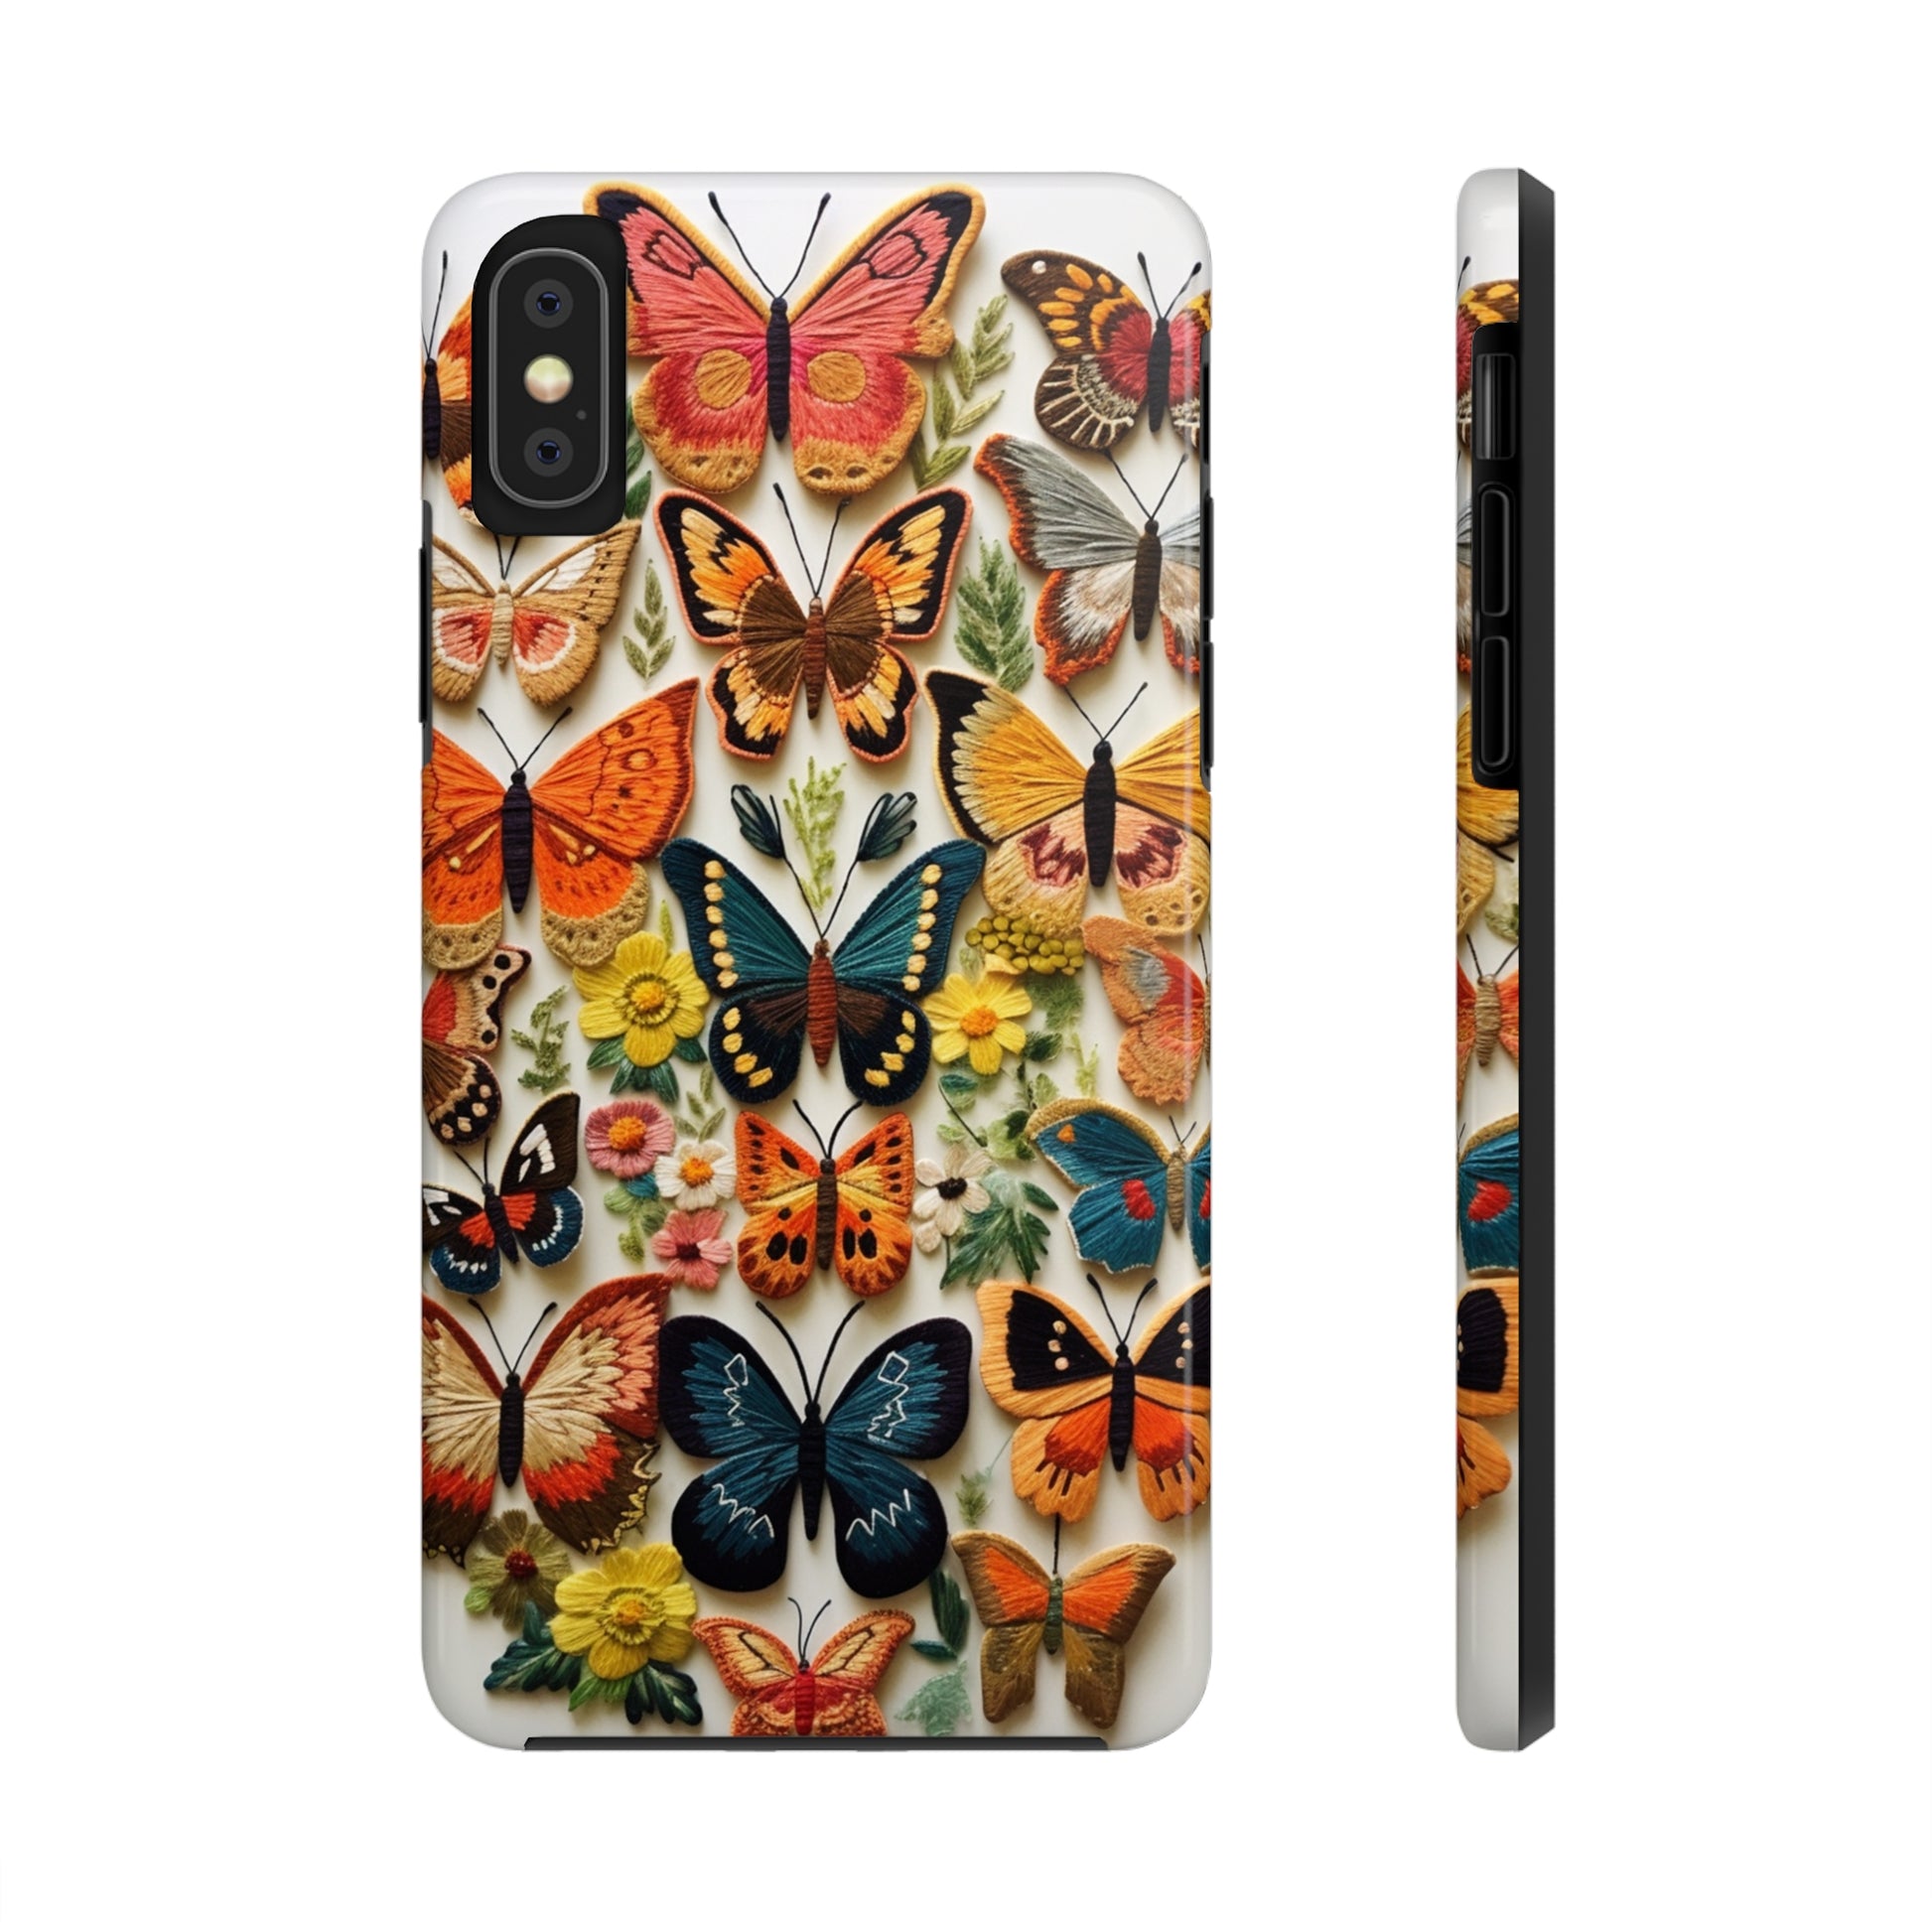 Embroidered butterfly motif iPhone case